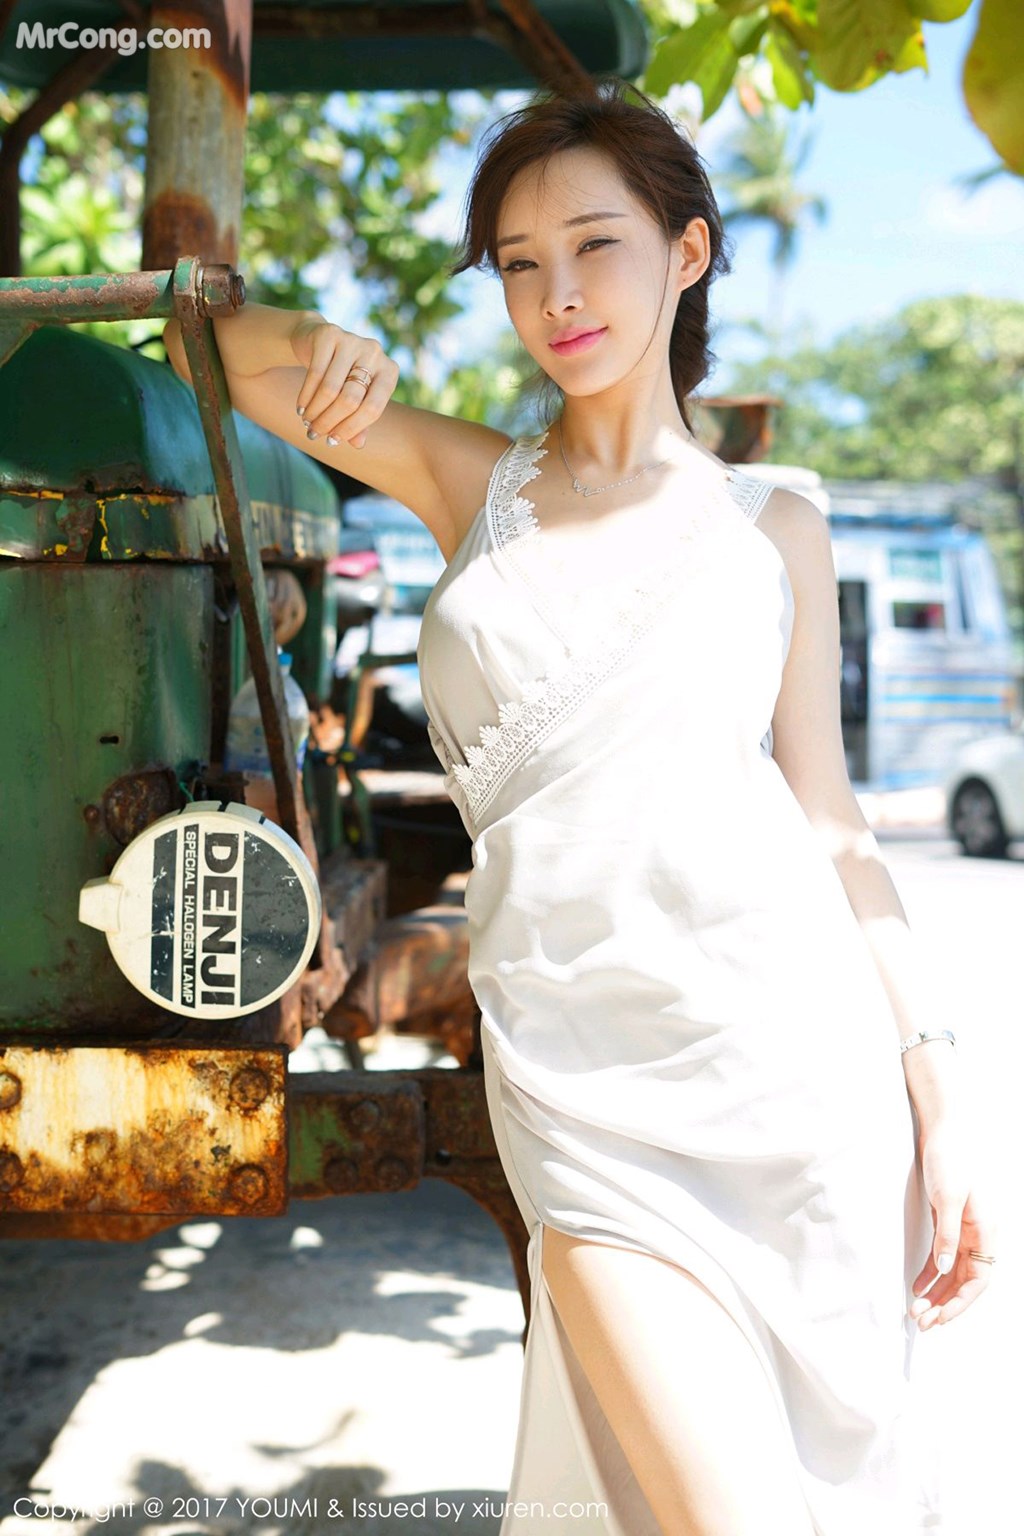 YouMi Vol.061: Model 土肥 圆 矮 挫 穷 (43 pictures) photo 2-8